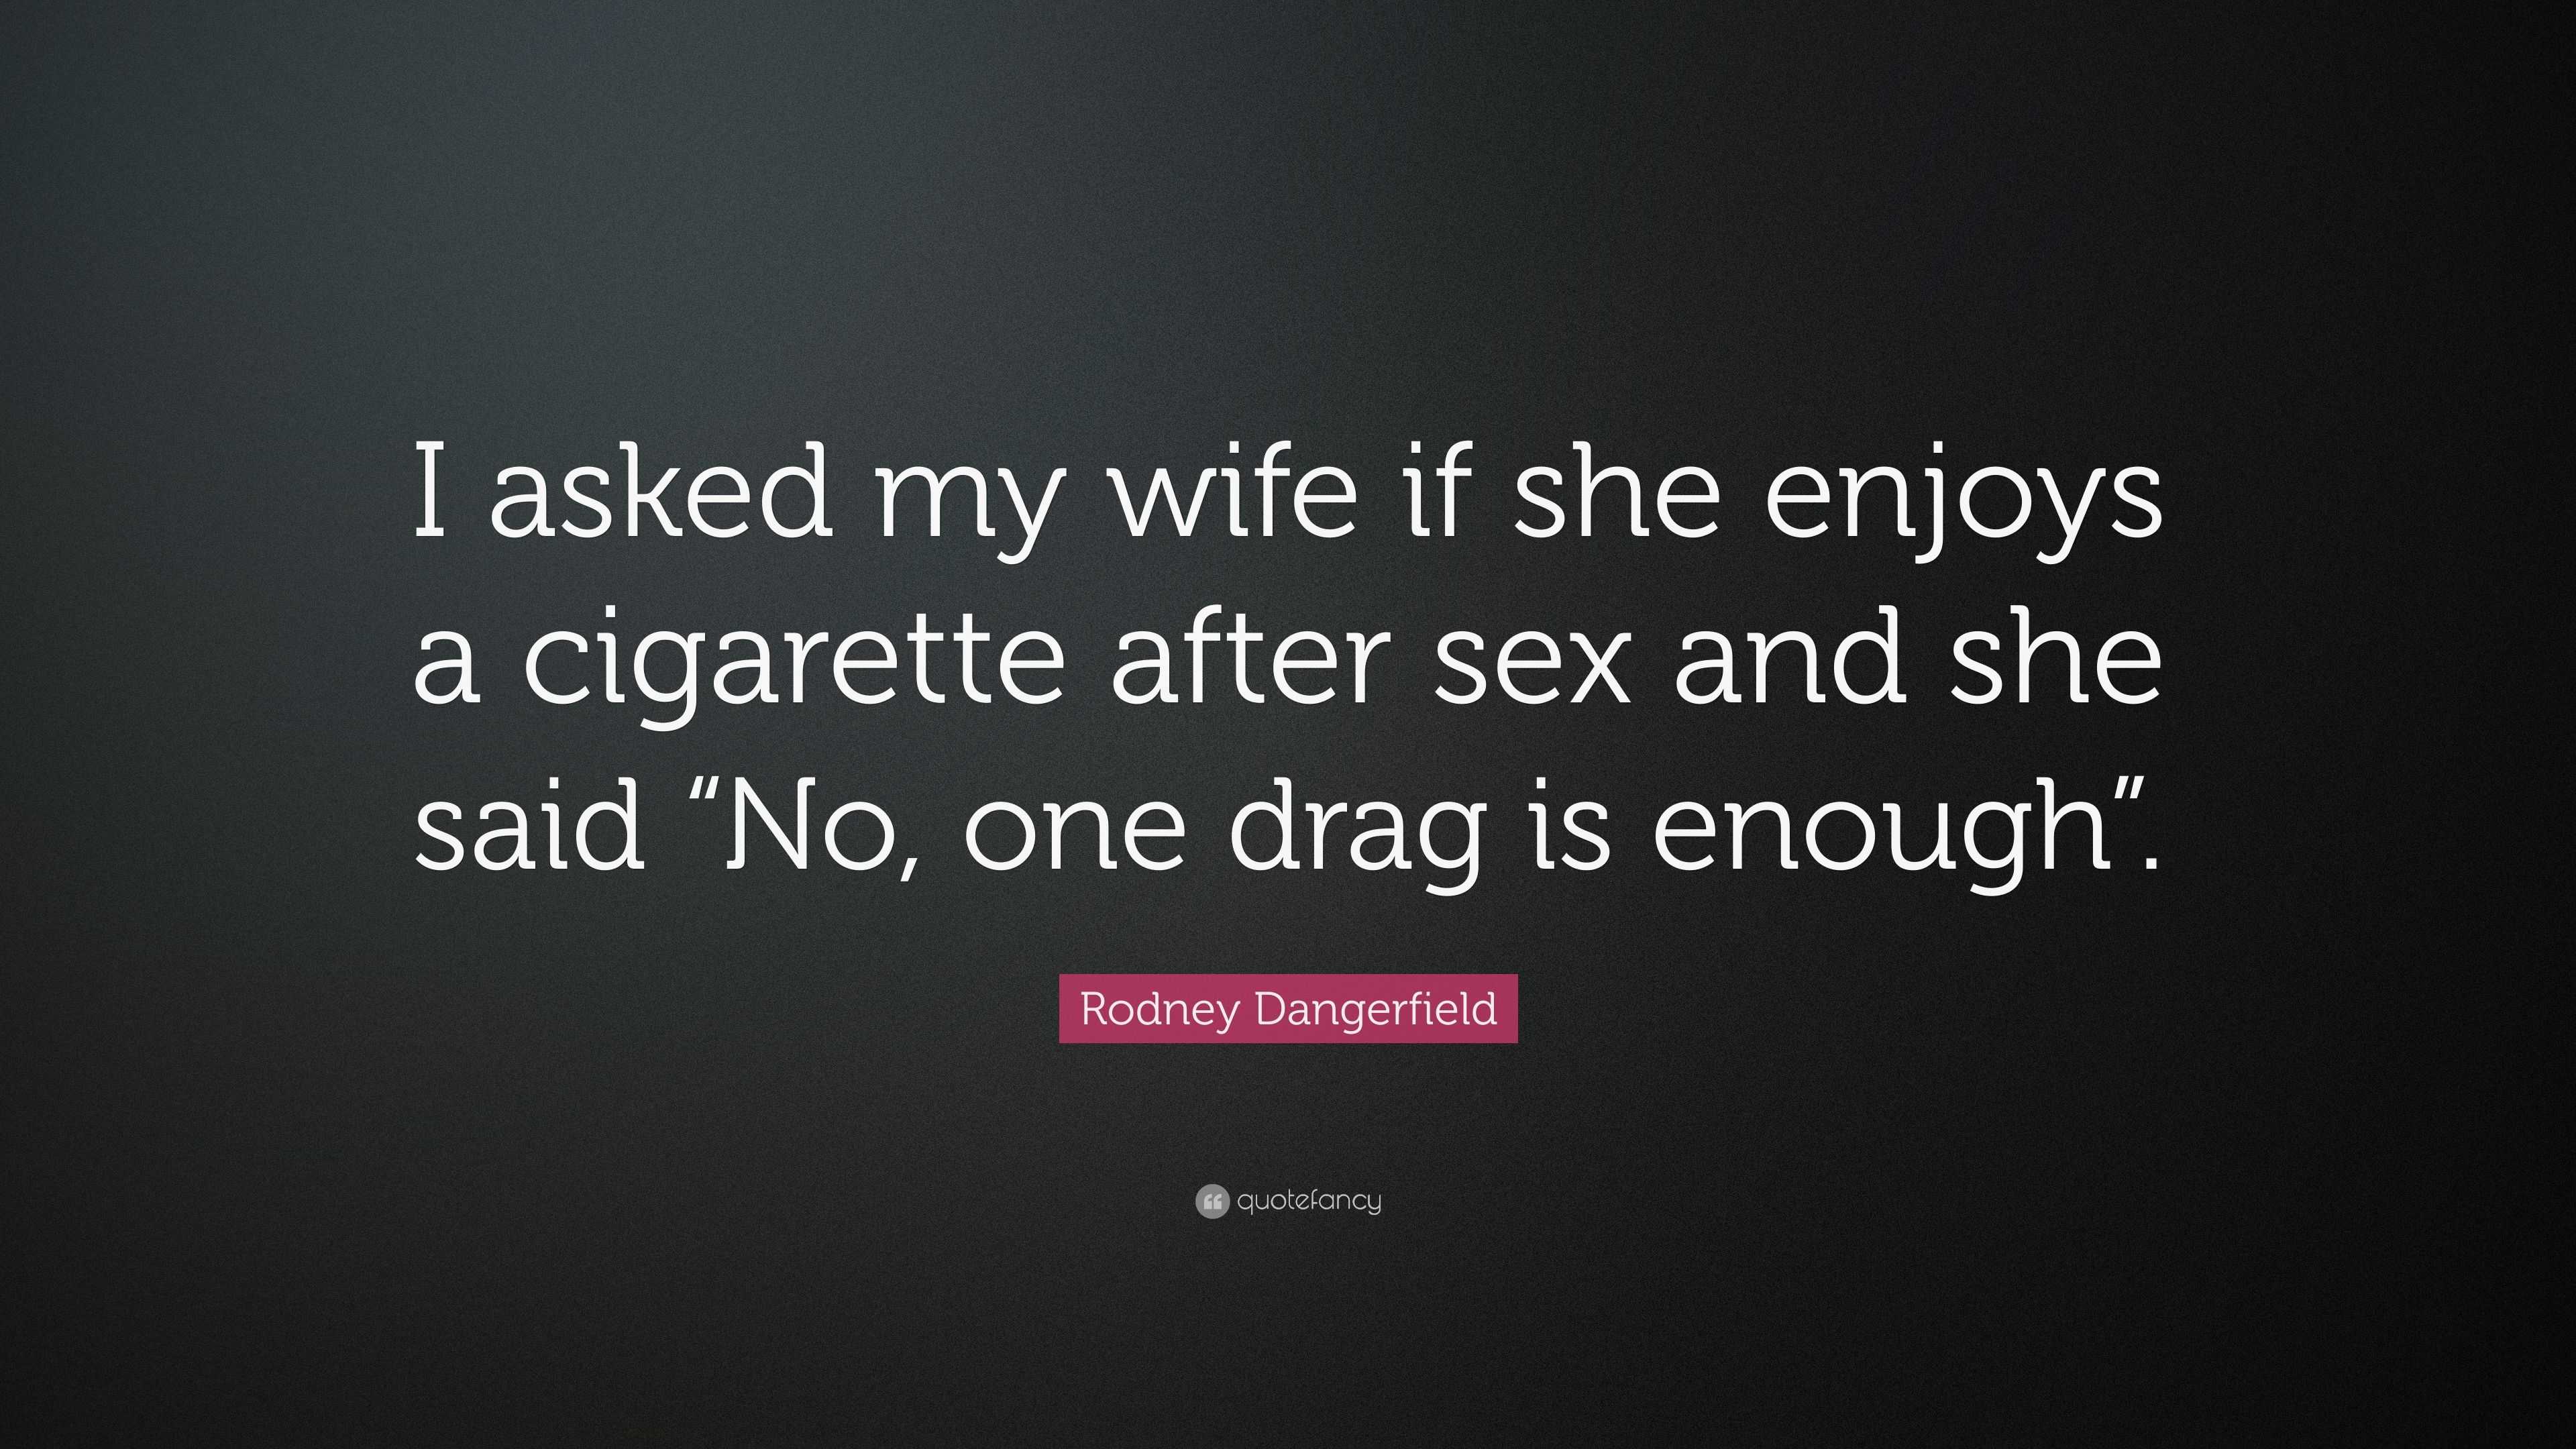 Rodney Dangerfield Quote “I asked my wife if she enjoys a cigarette after sex and